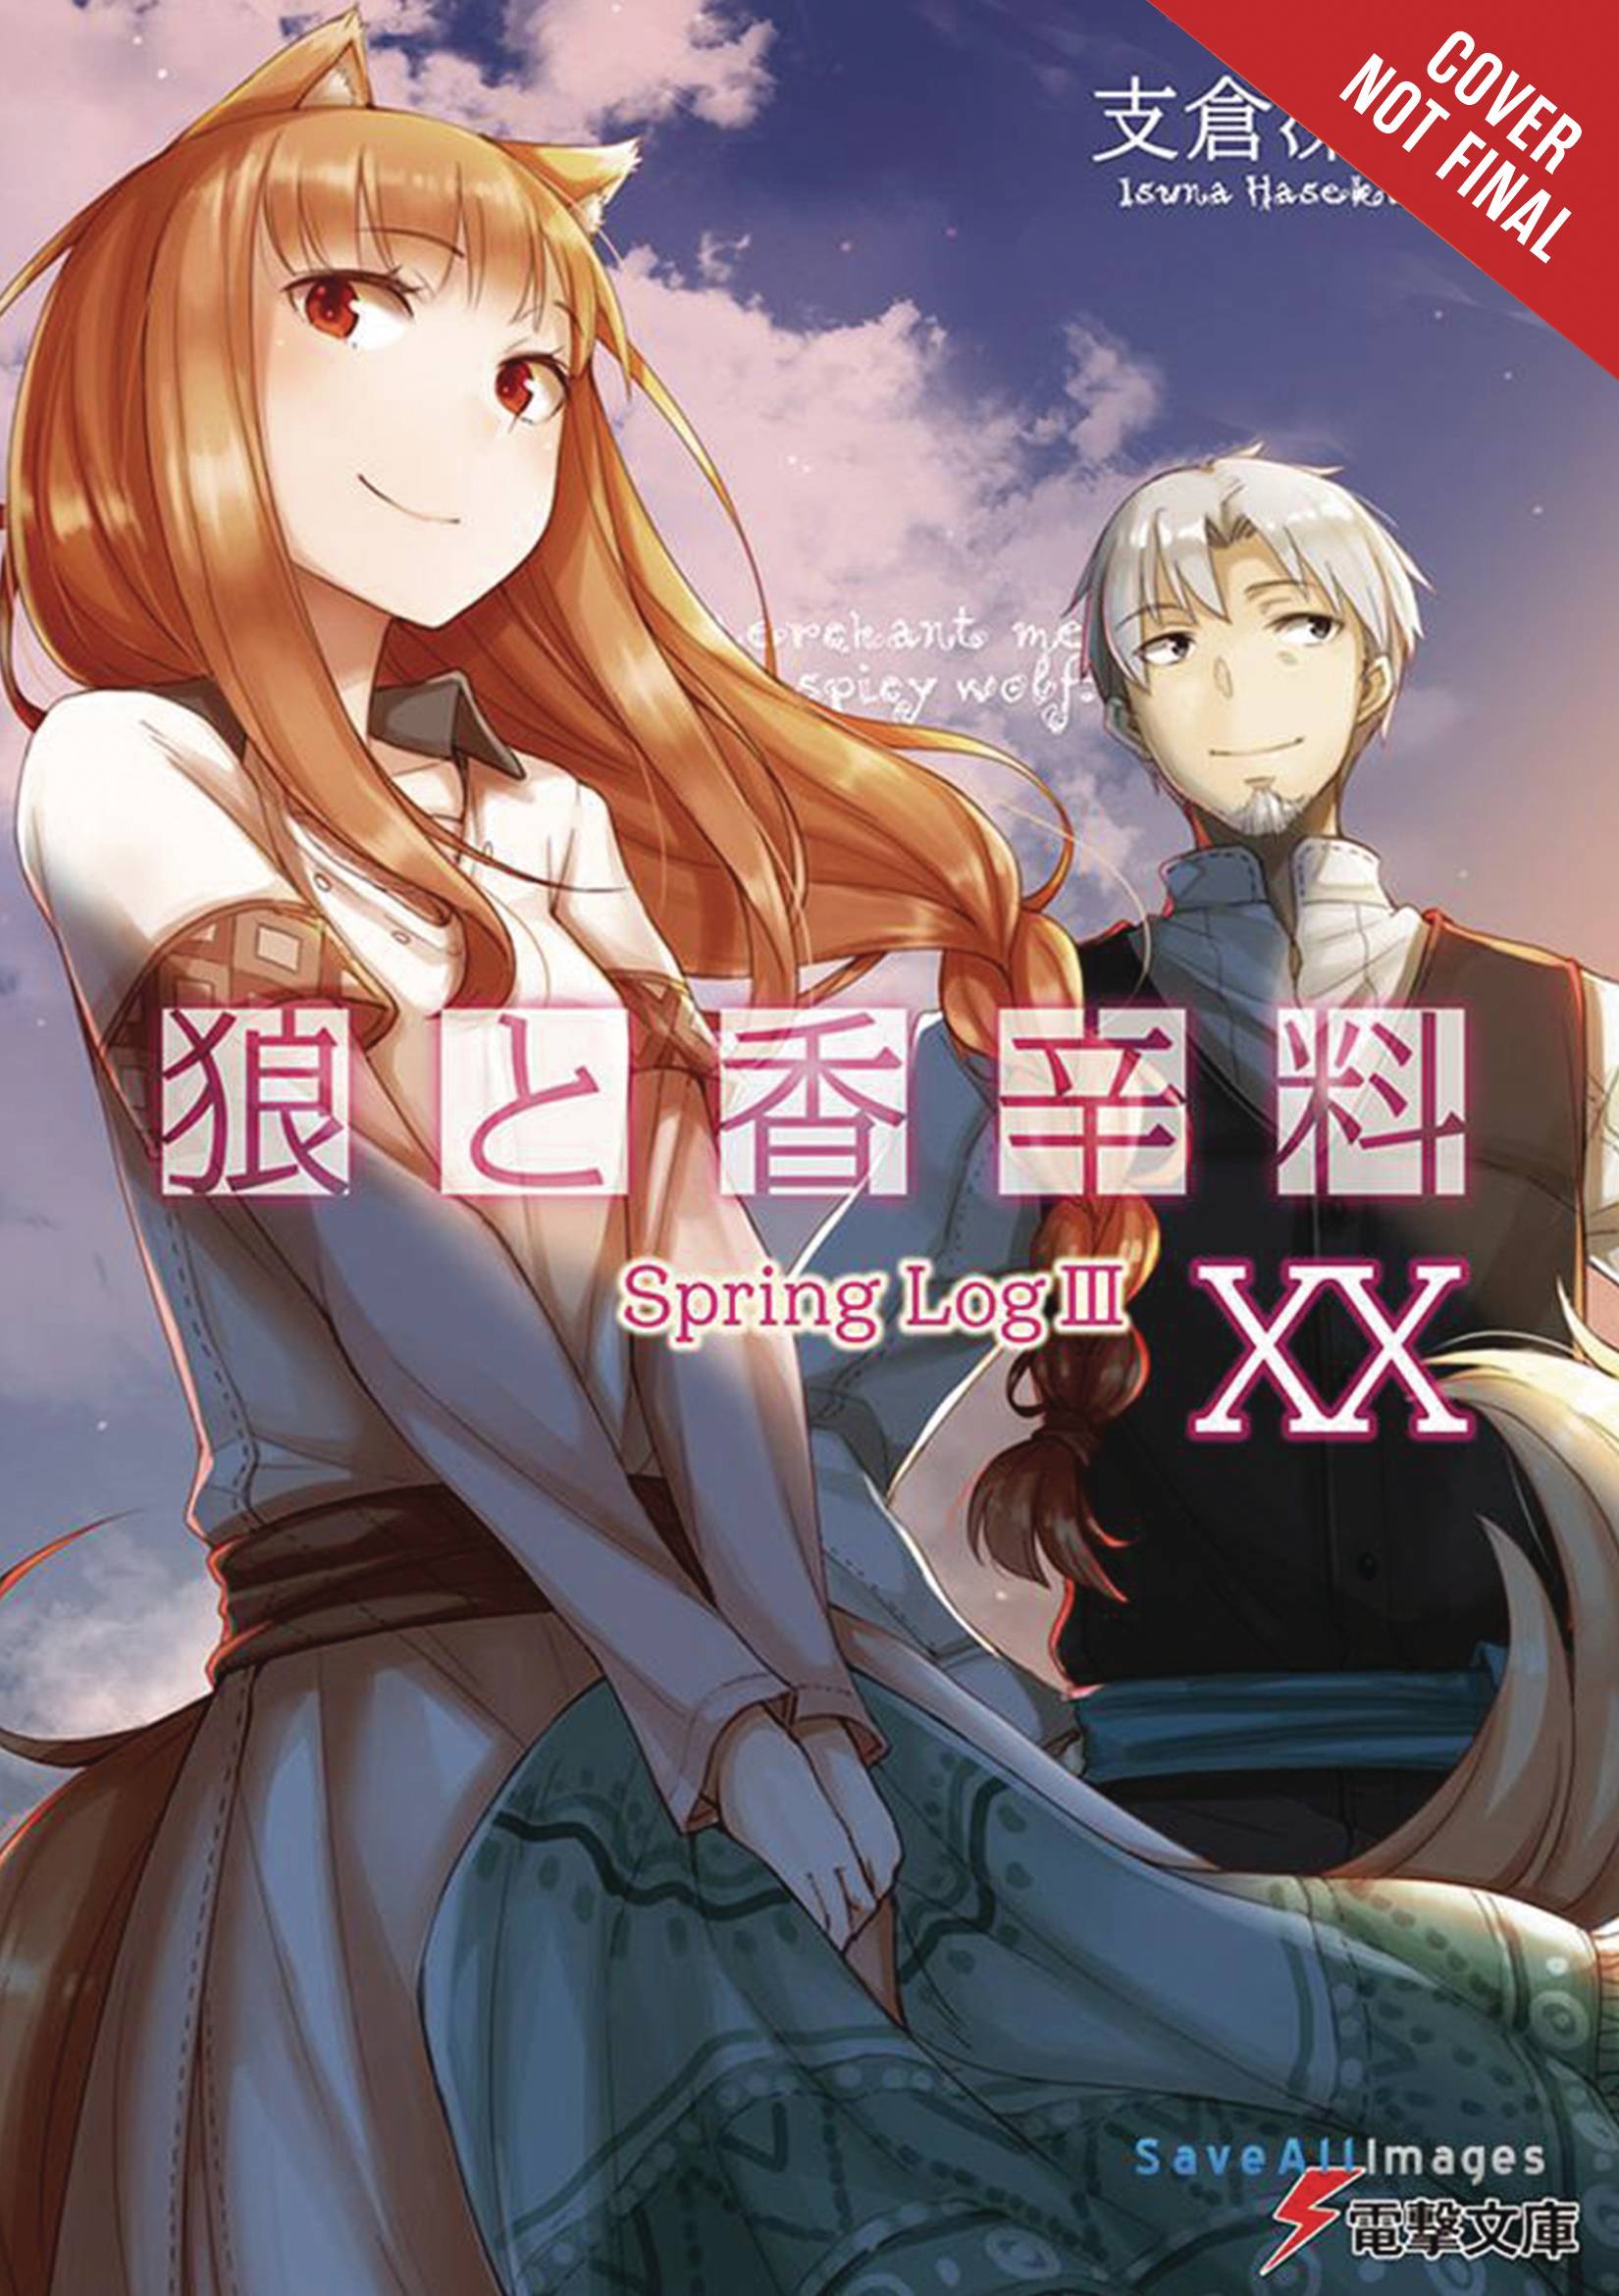 SPICE AND WOLF LIGHT NOVEL SC VOL 20 SPRING LOG III